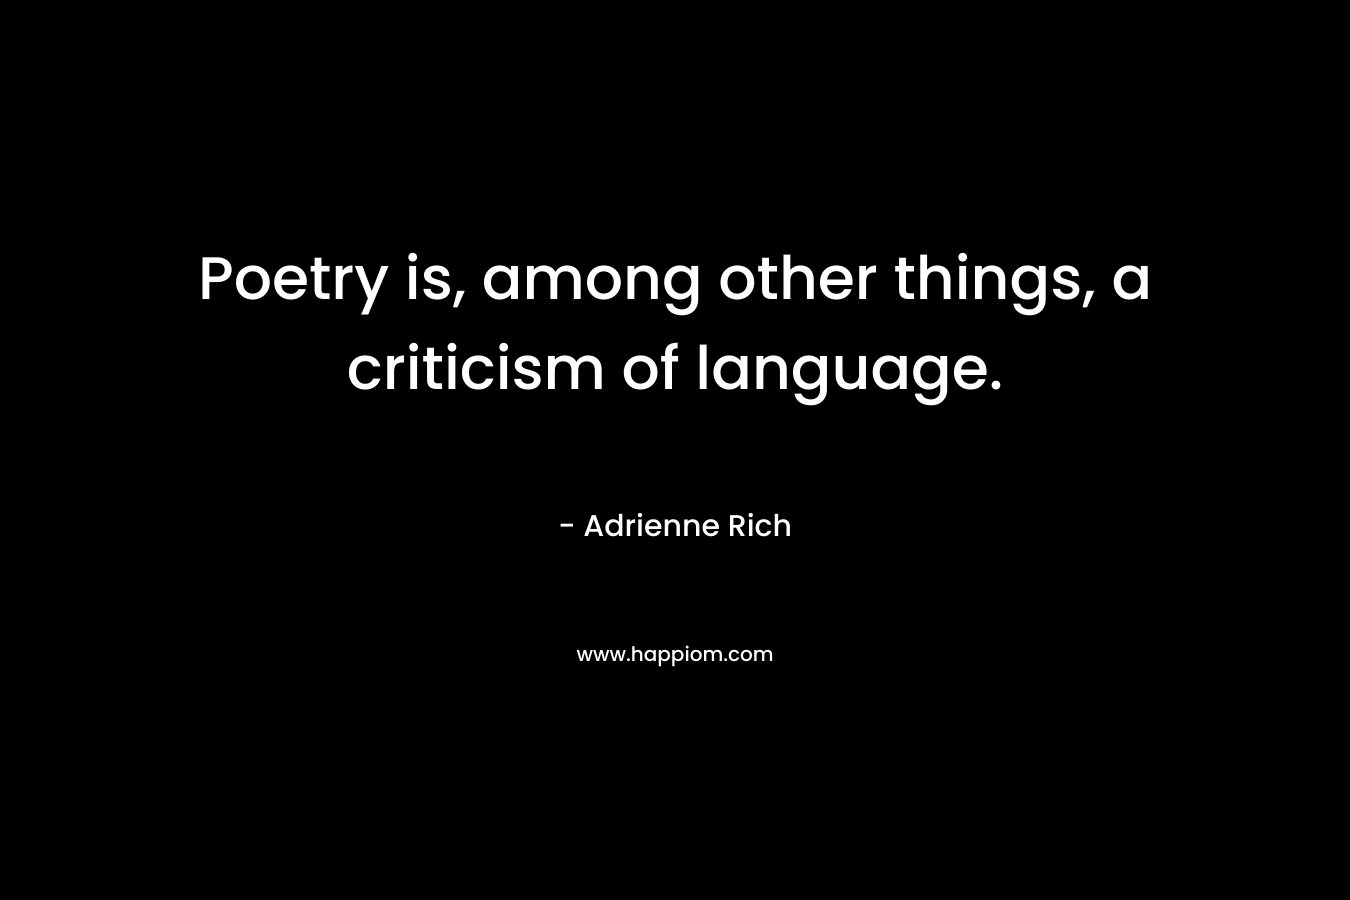 Poetry is, among other things, a criticism of language.